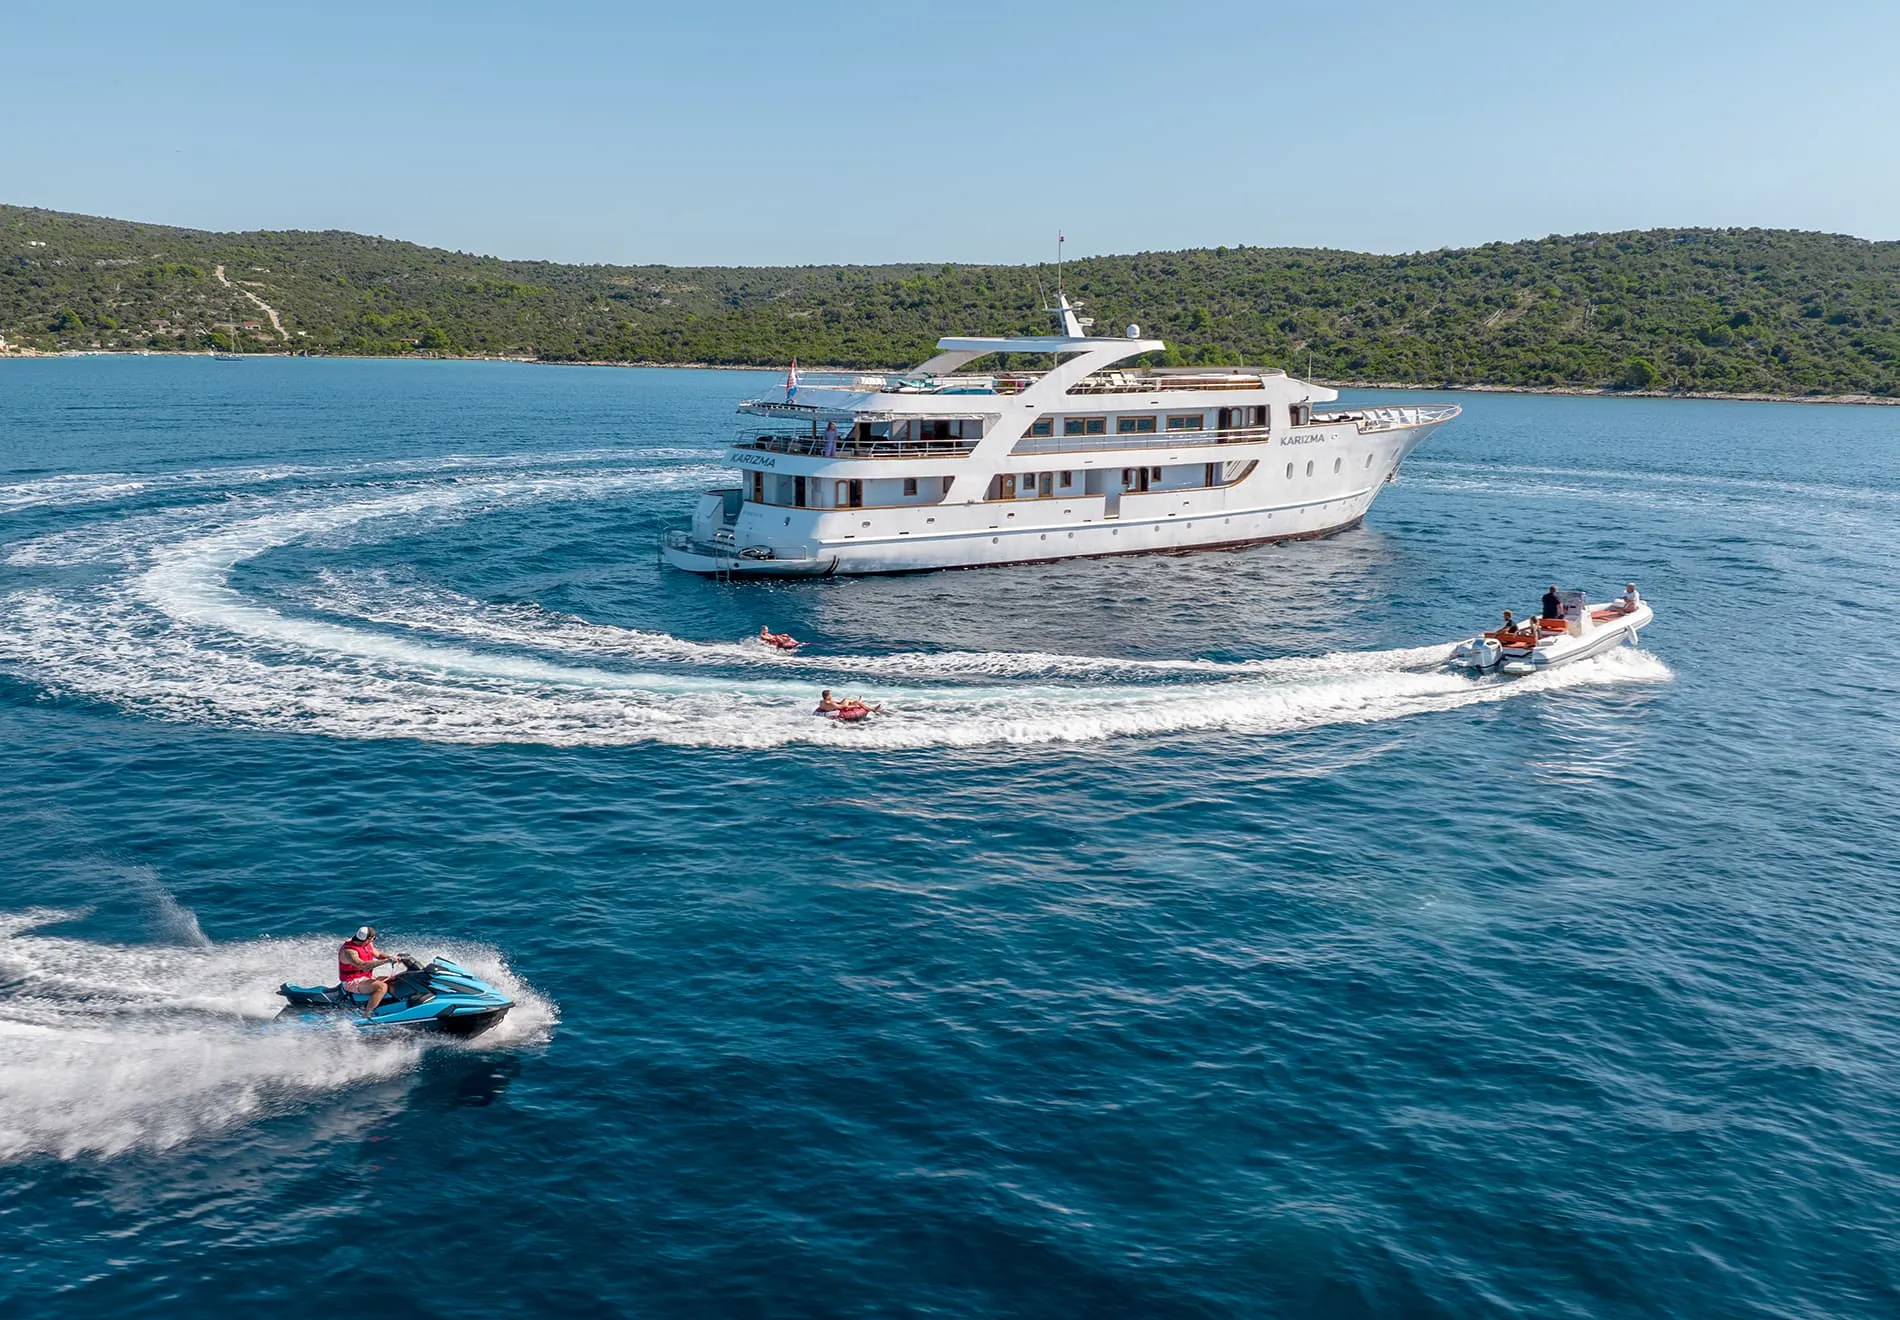 Expanded our central agency fleet to 16 yachts